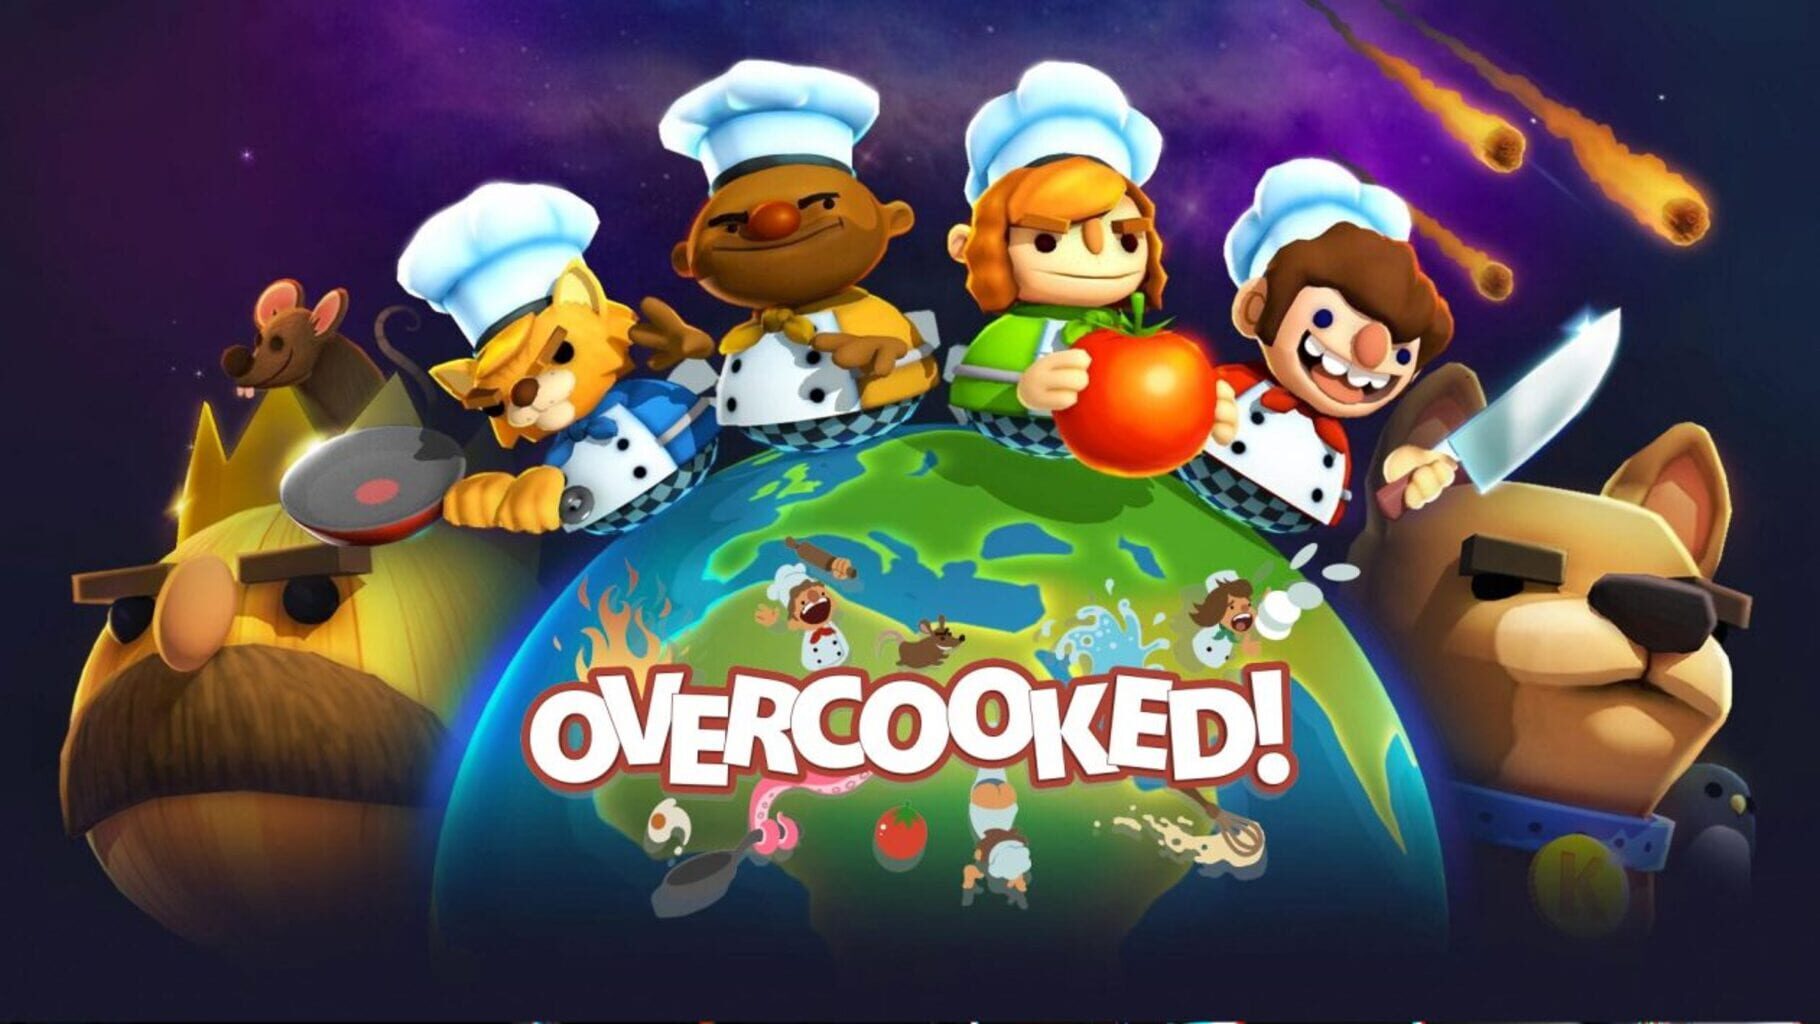 Artwork for Overcooked!